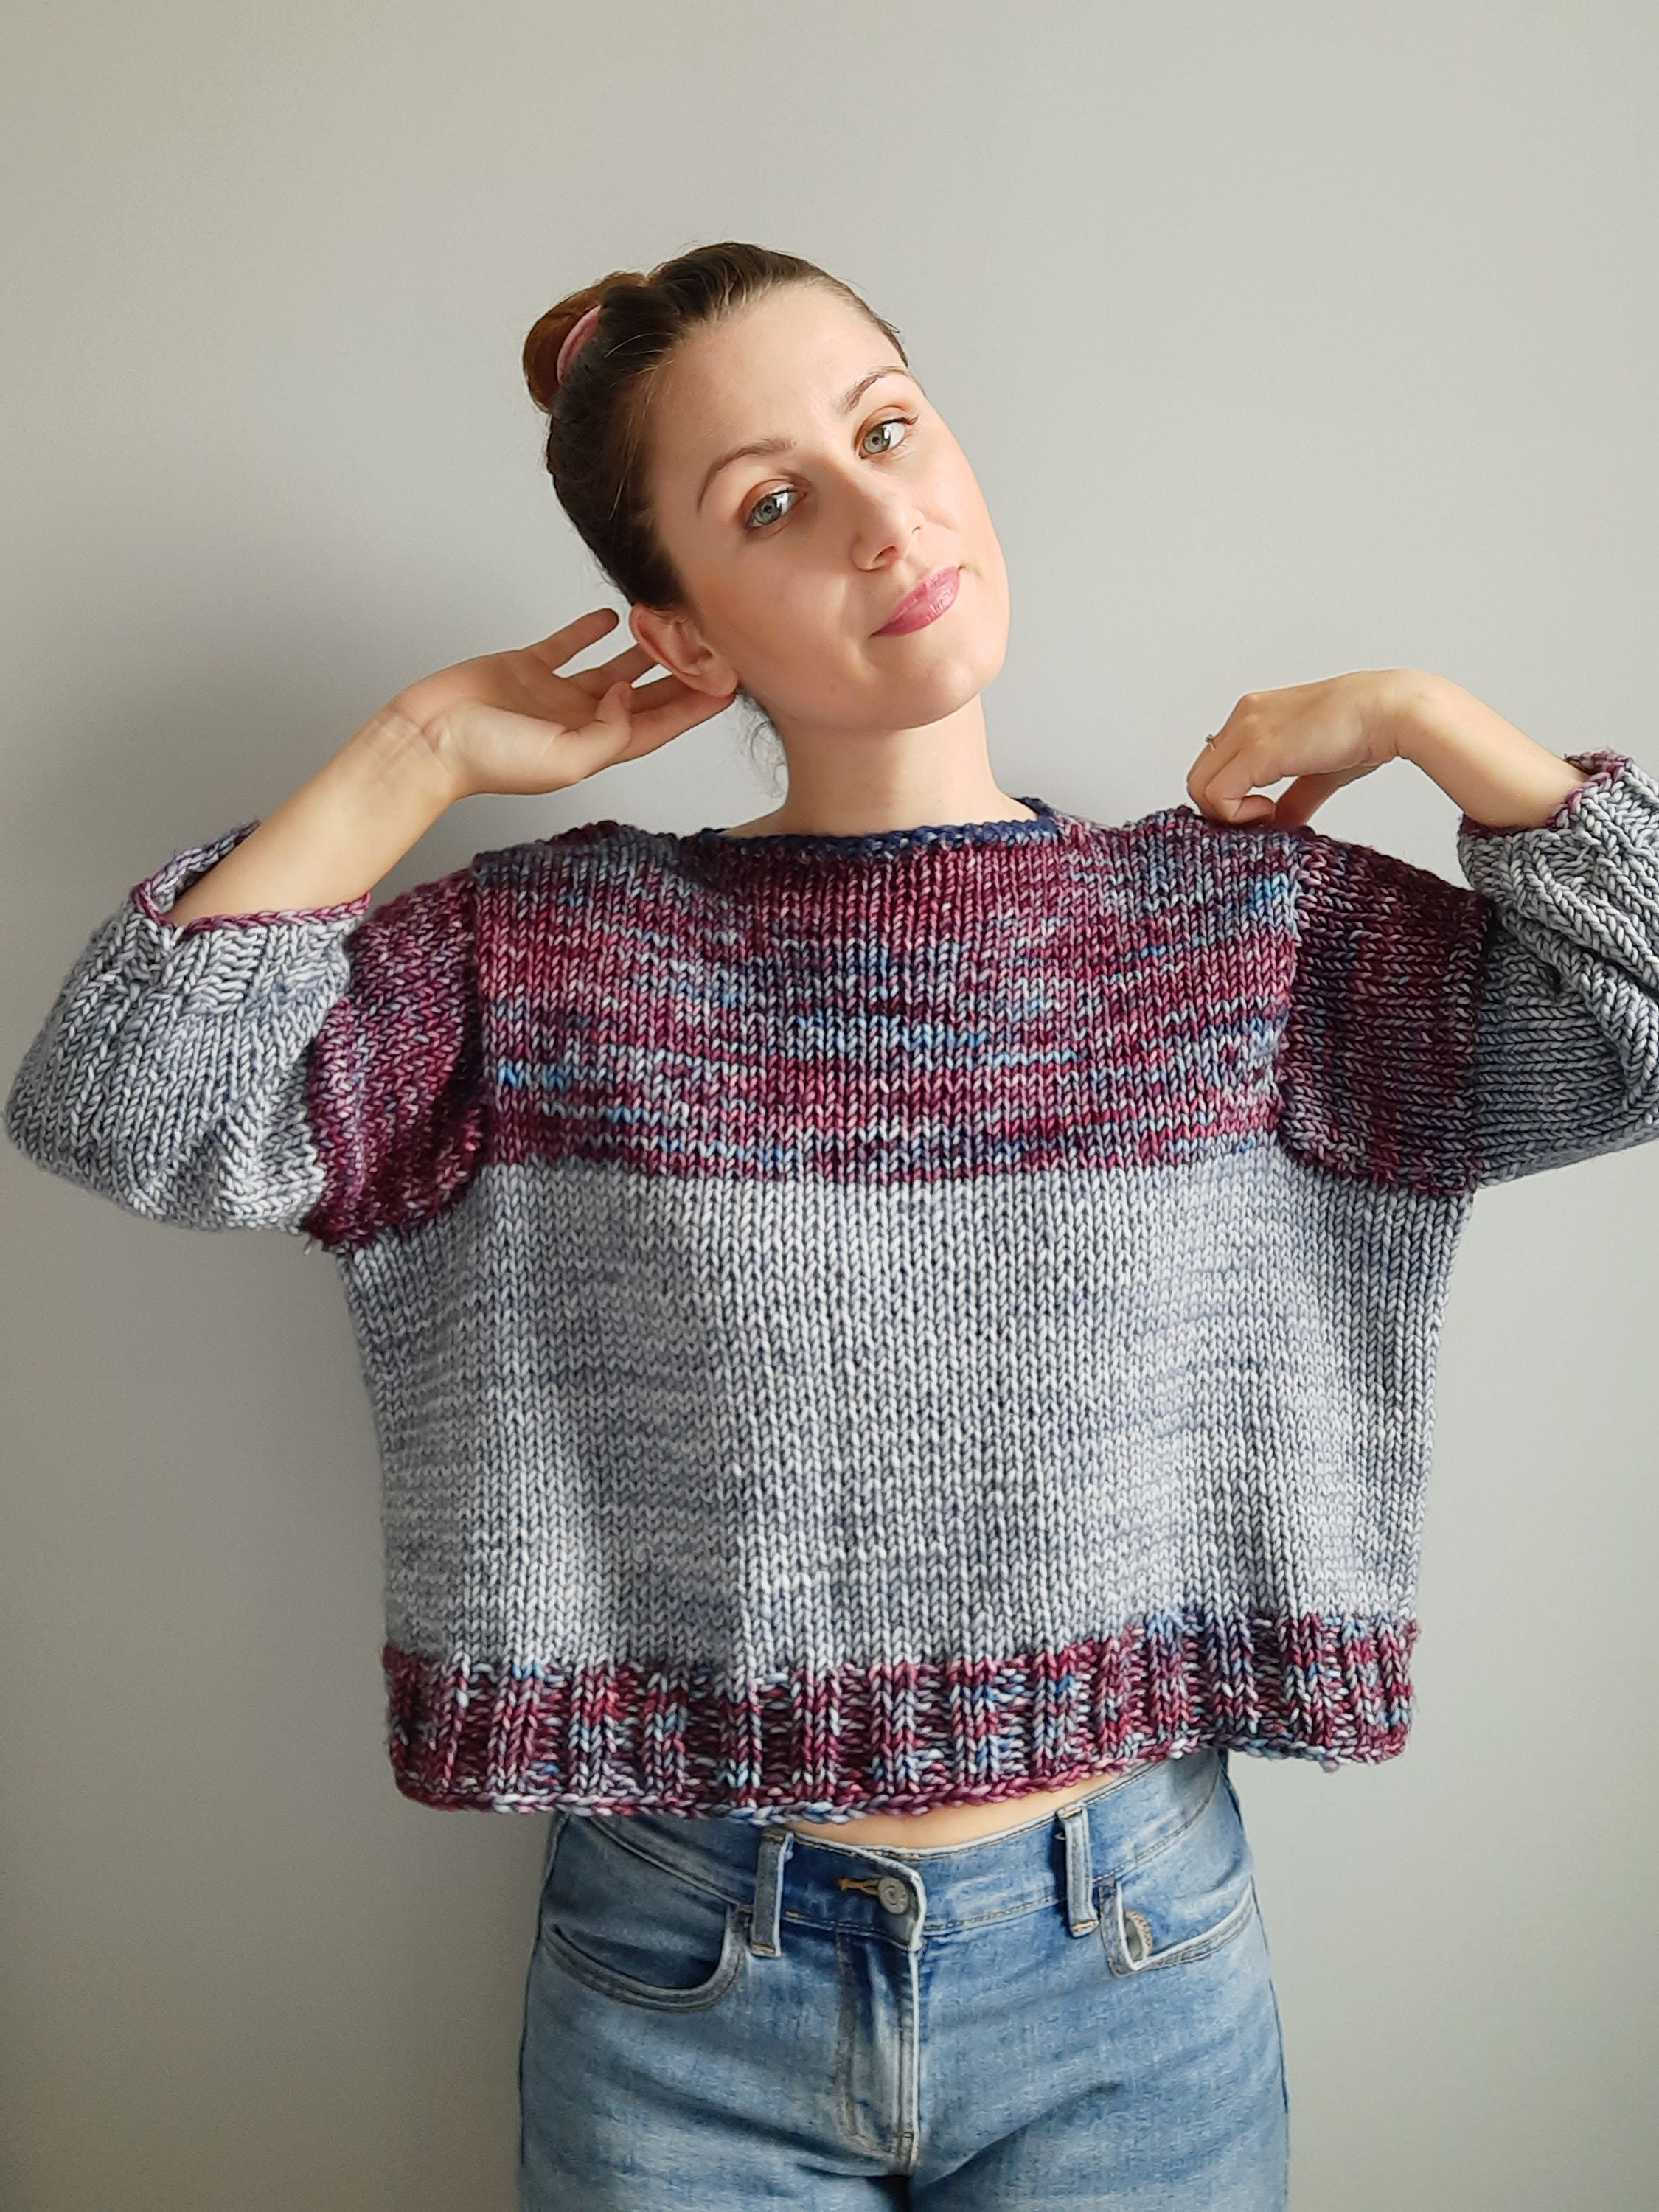 The Lazy Lucy Jumper Loom Knitting Knitting pattern by Rosy Stitches